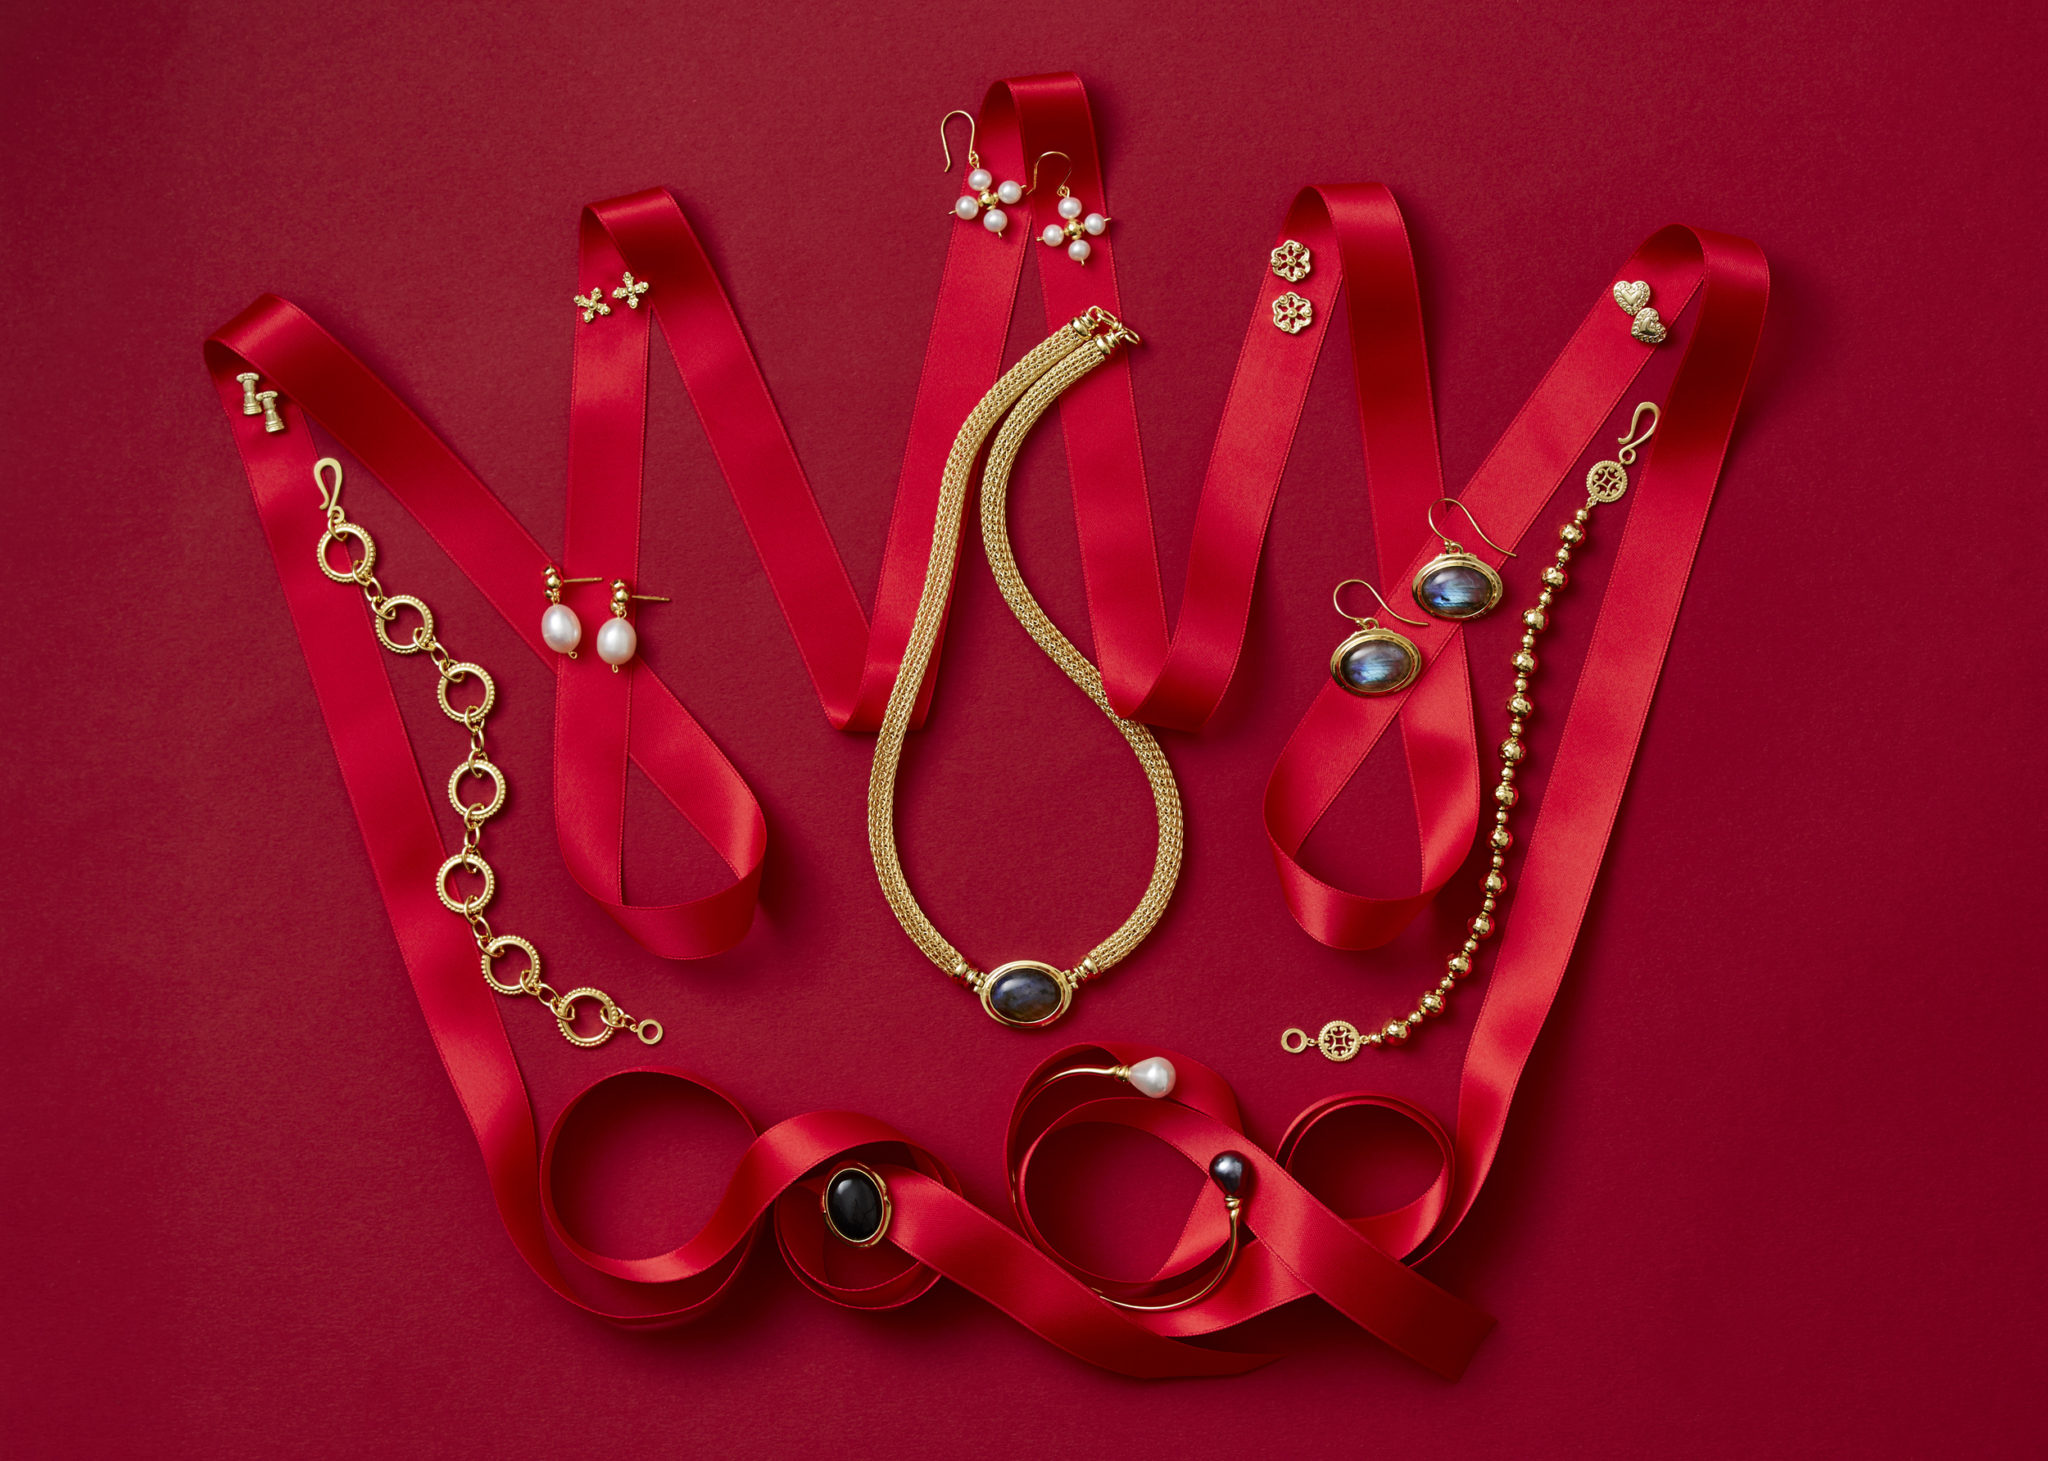 marketing still life photograph of a crown made of red ribbon adorned with gold, lapis, and pearl jewelry including earrings, necklaces, and bracelets on a red background.